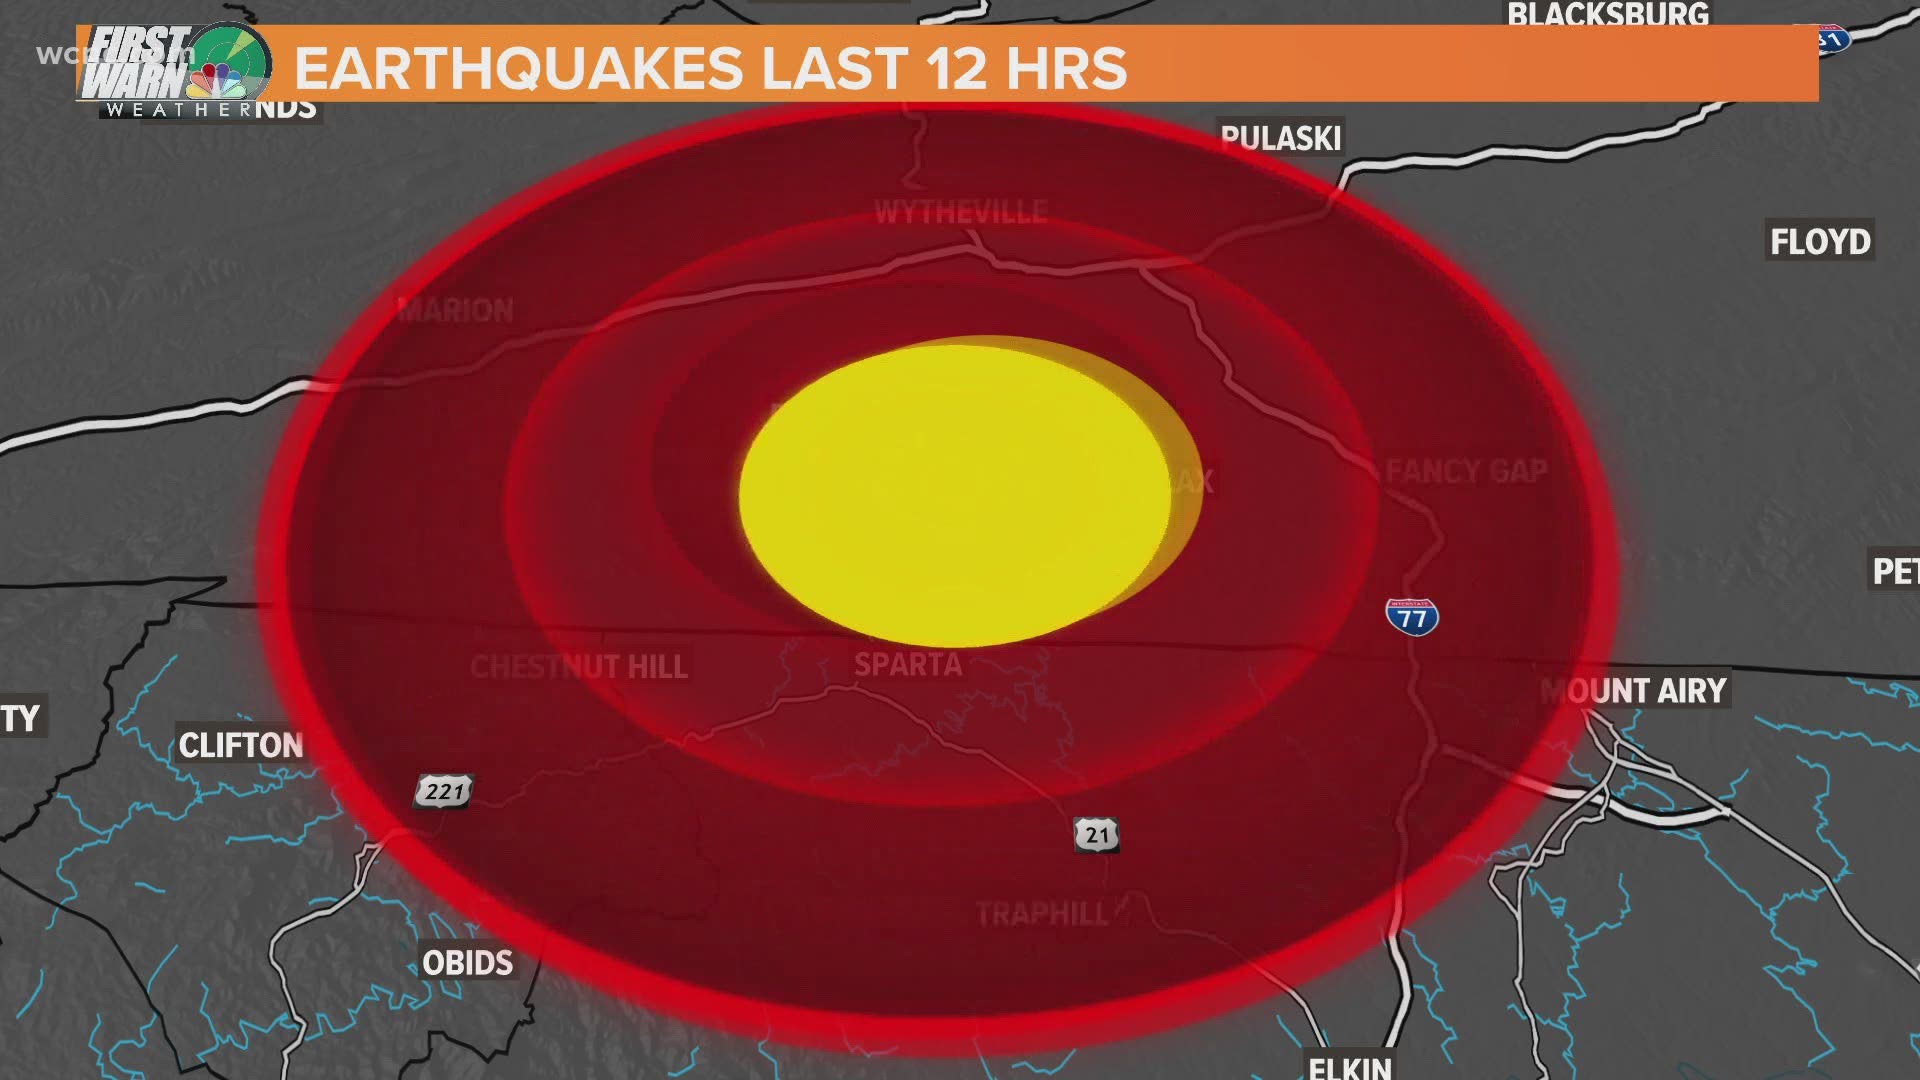 According to Chief Meteorologist Brad Panovich, a 5.1 earthquake was reported near Sparta, North Carolina which was the location of yesterday's 2.3.